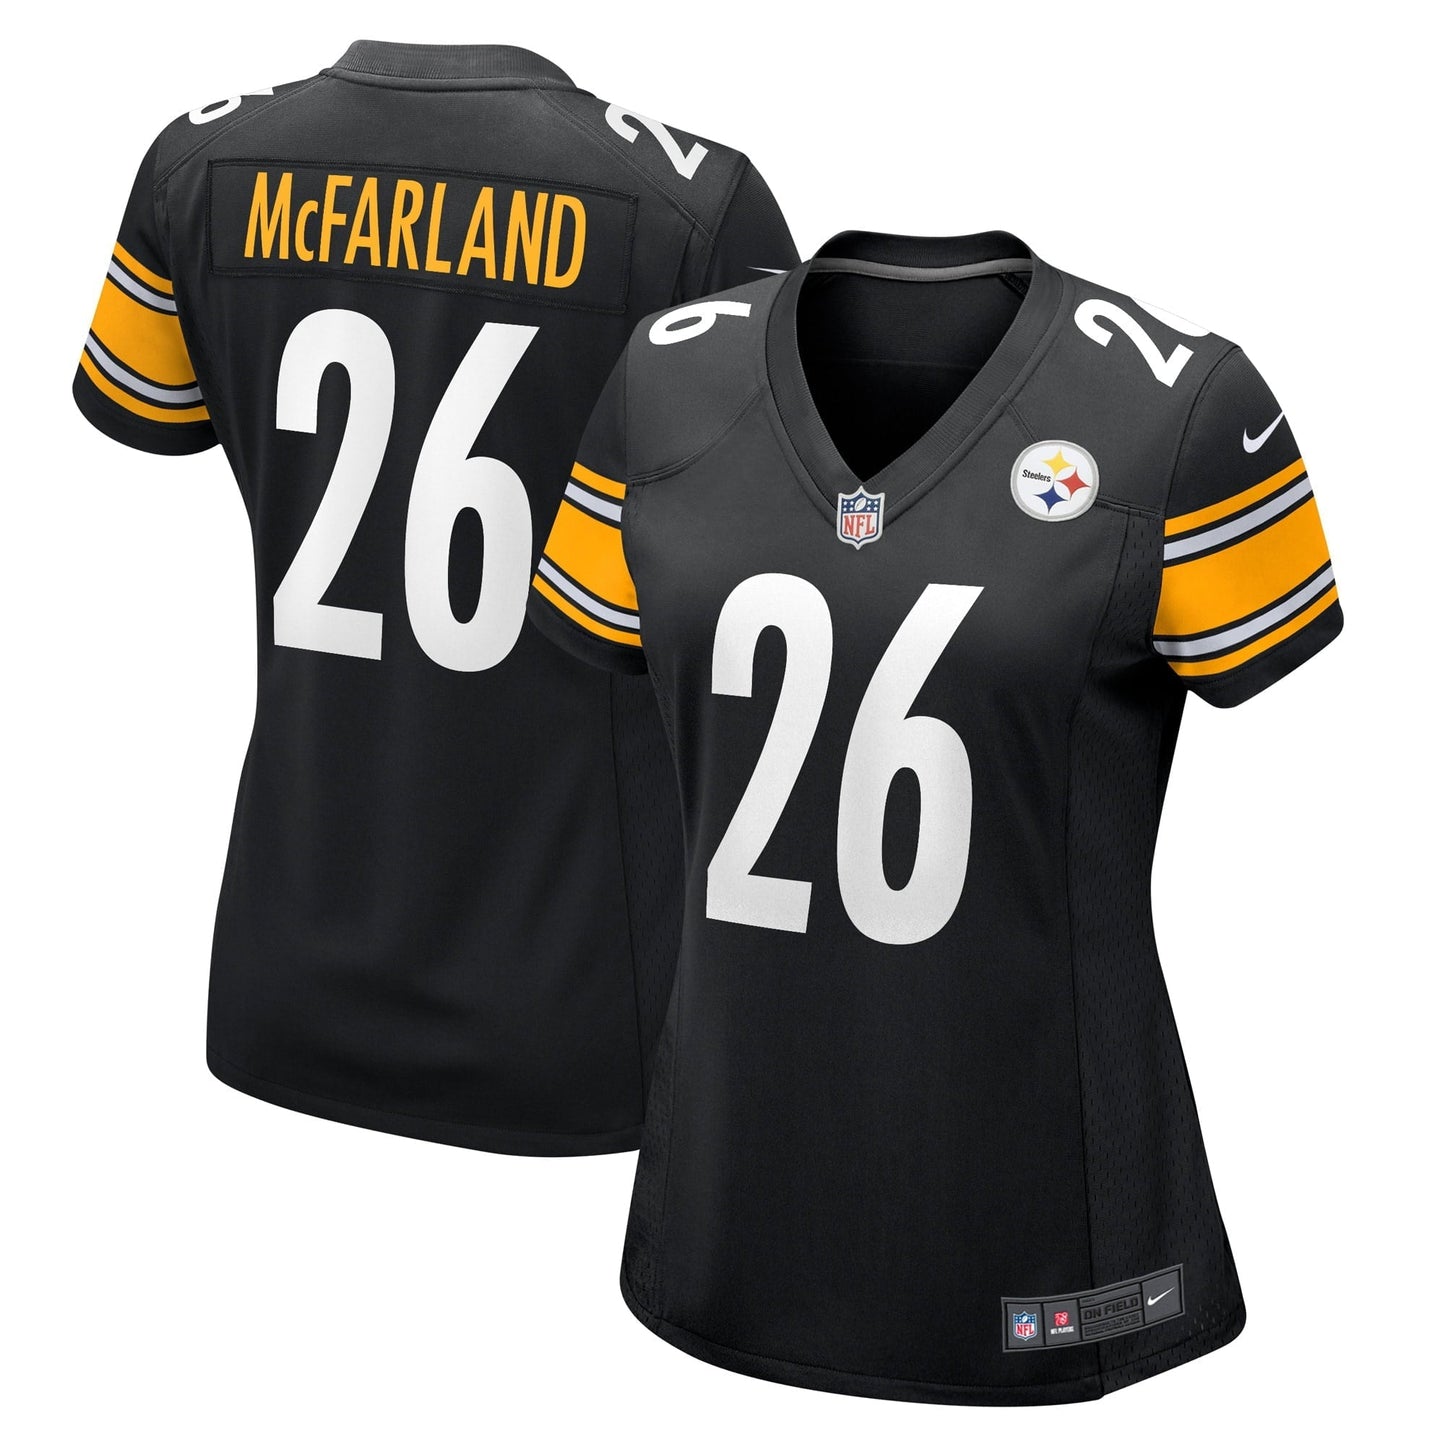 Women's Nike Anthony McFarland Jr. Black Pittsburgh Steelers Game Player Jersey